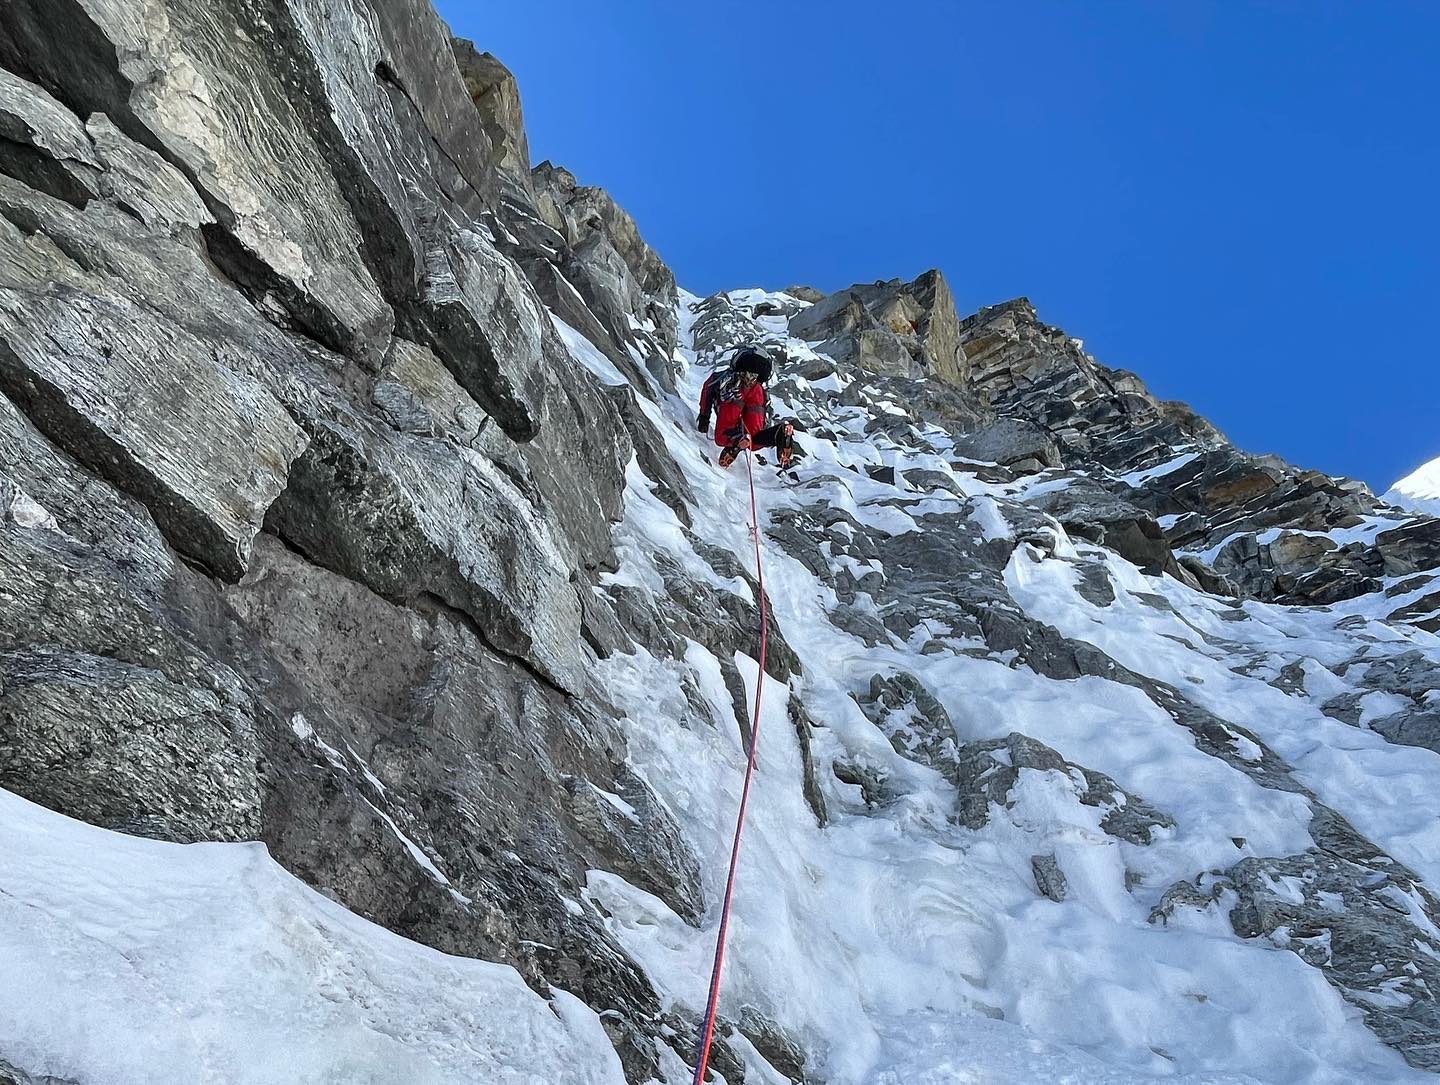 Canada-Based Alpinists Climb Epic New Route in Himalayas - Gripped Magazine